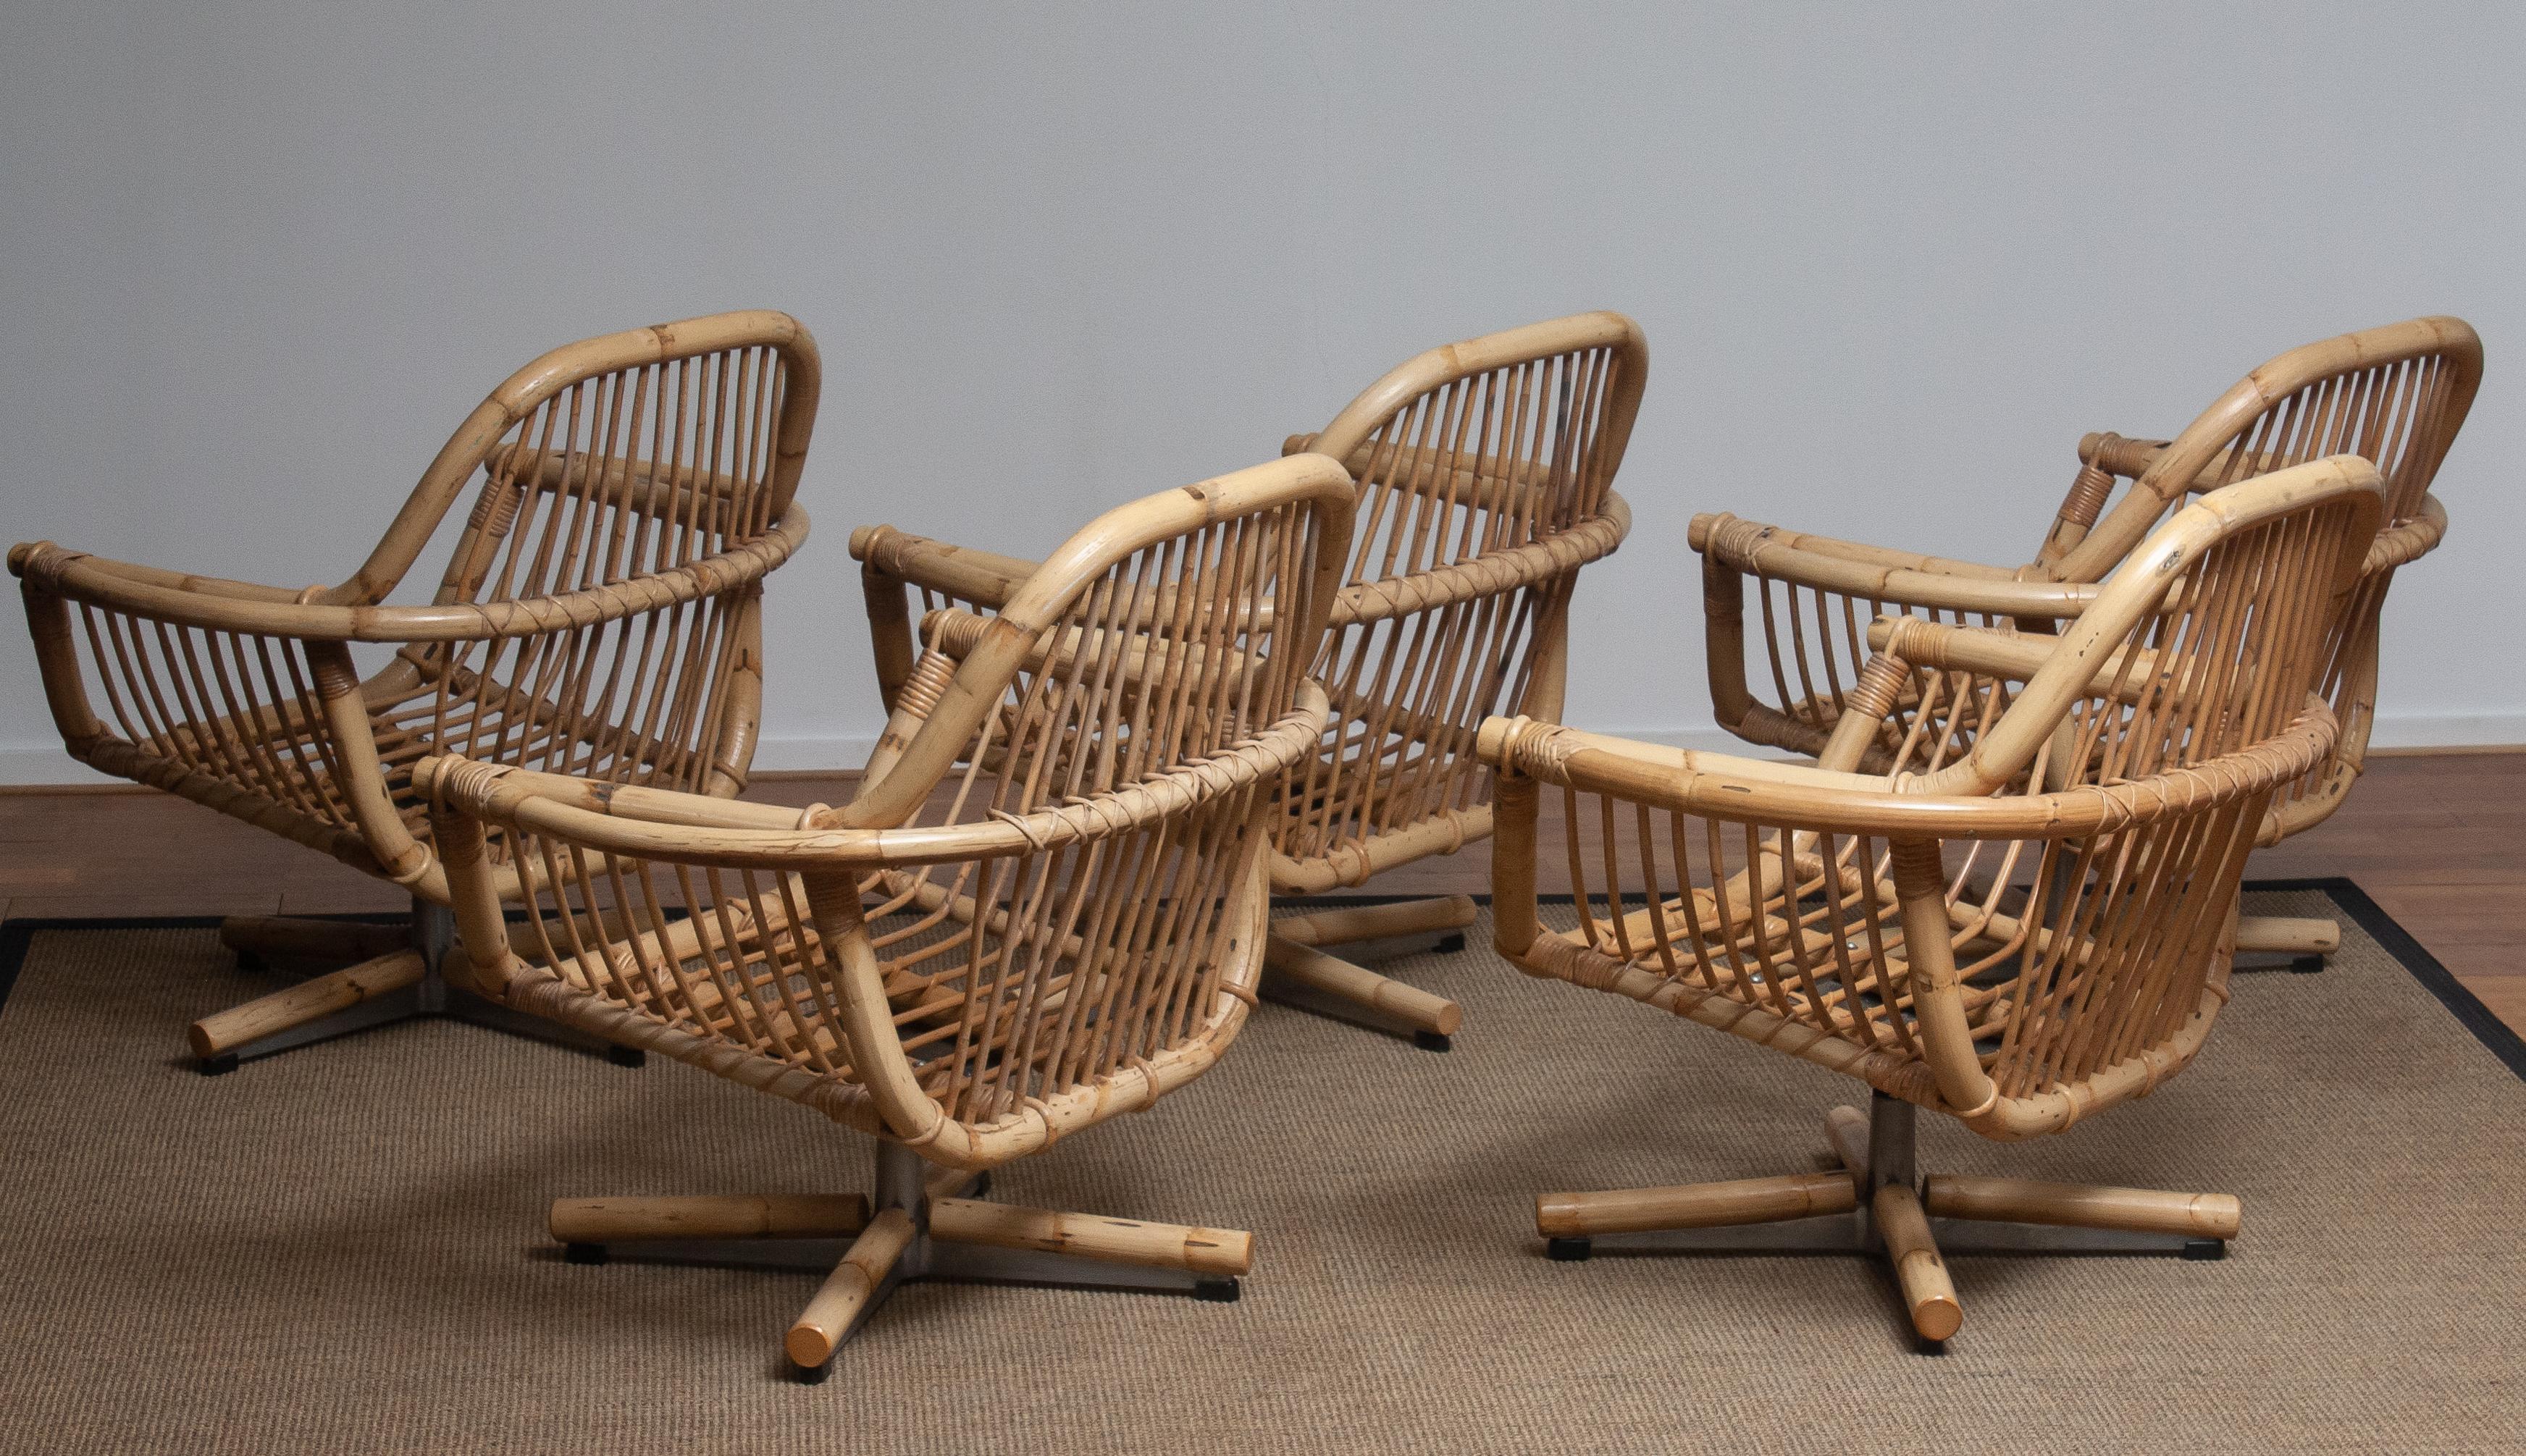 1960s Rattan Garden Set / Lounge Set Consist Five Swivel Chairs and Coffee Table 11